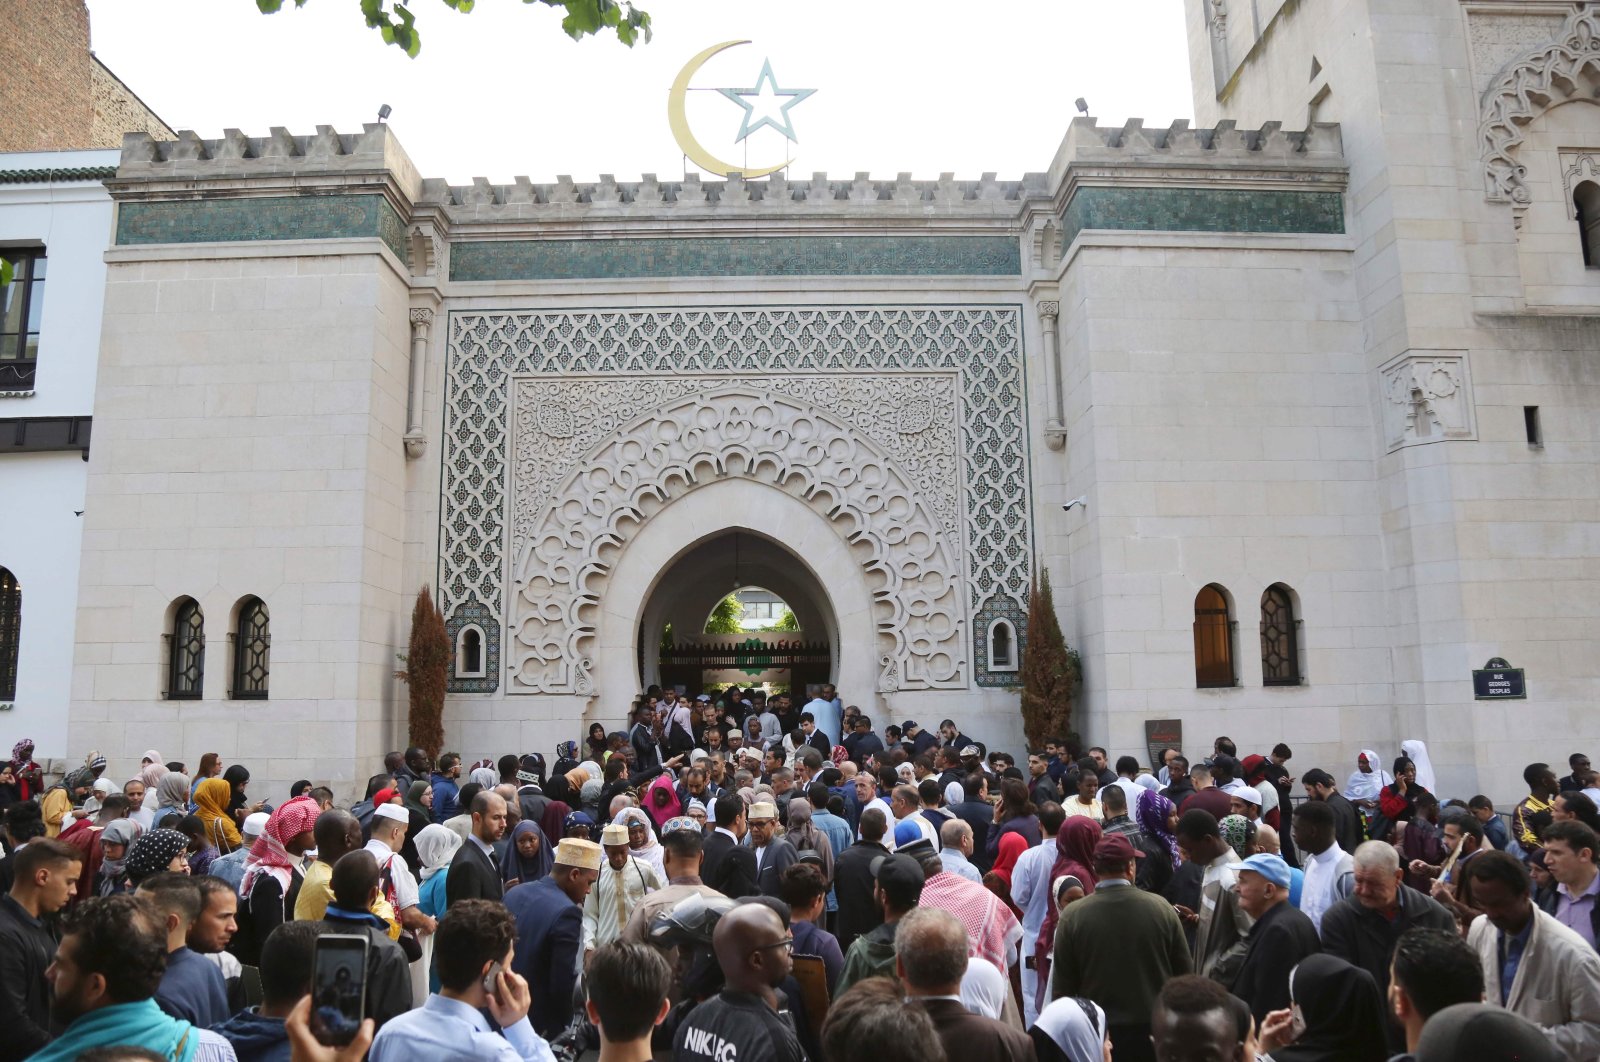 Muslims gather at the Grande Mosquee de Paris (Great Mosque of Paris) at the start of the Eid al-Fitr holiday which marks the end of Ramadan, in Paris, France, on June 14, 2018. (AFP Photo)